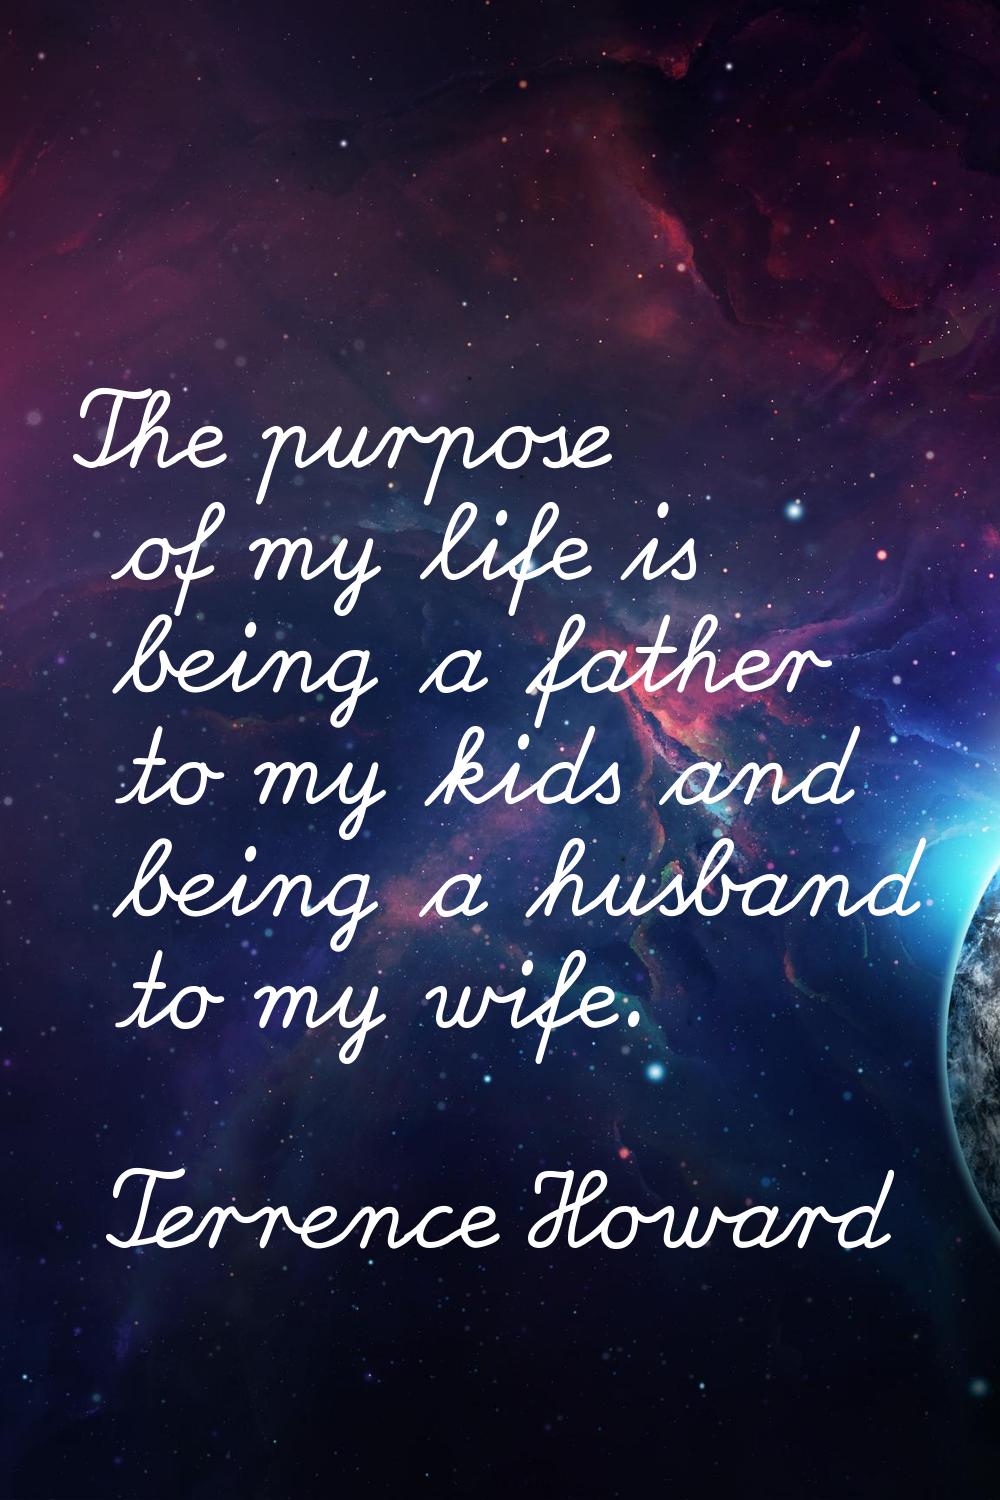 The purpose of my life is being a father to my kids and being a husband to my wife.